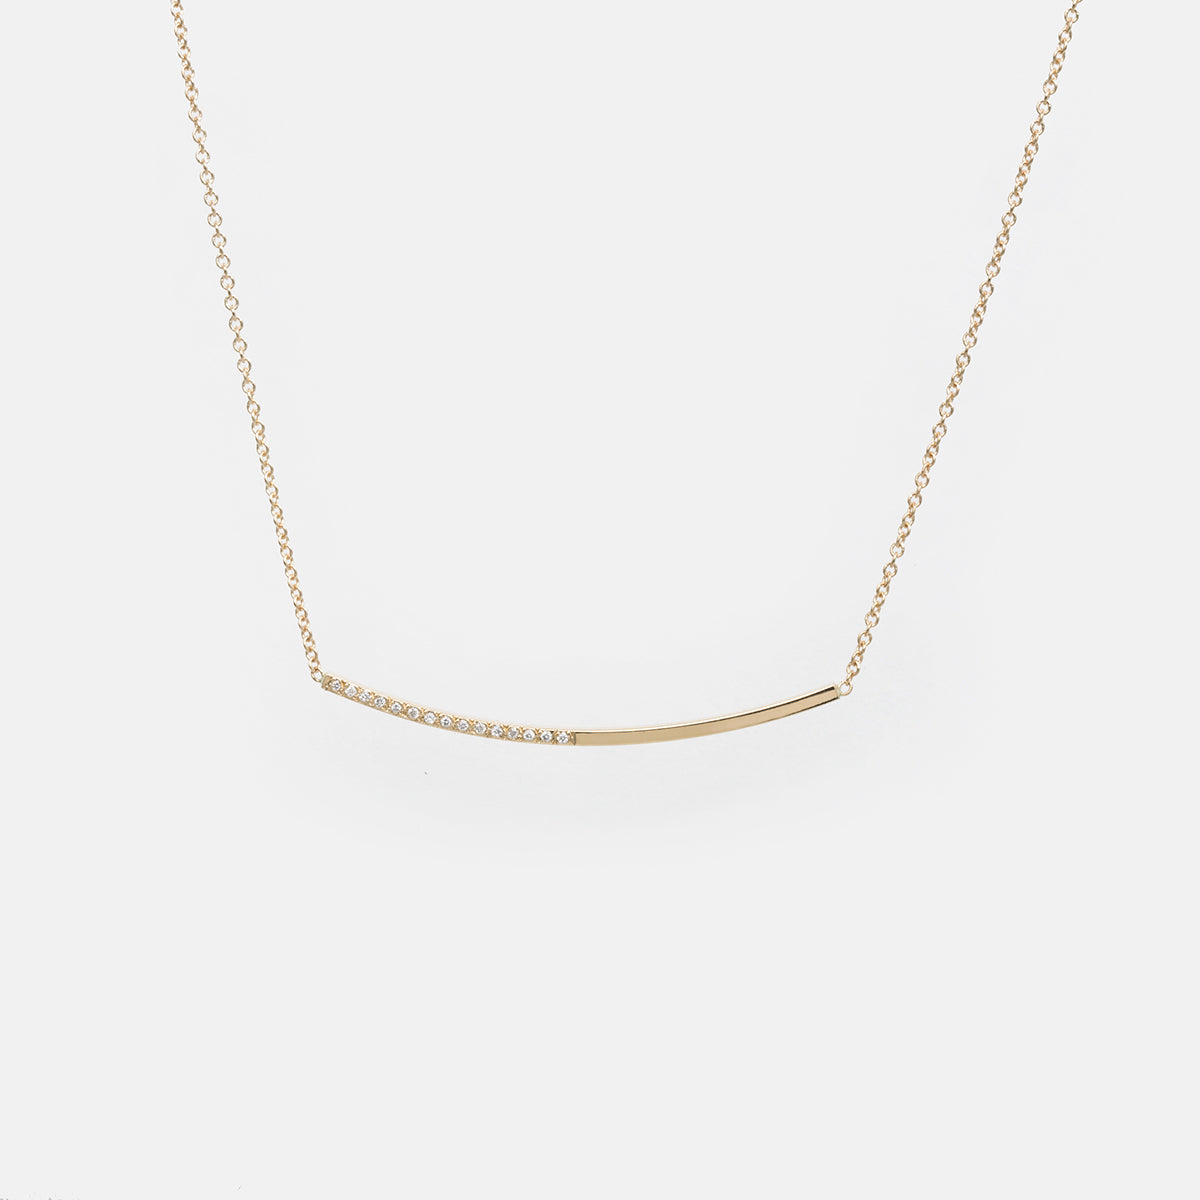 Iva Simple Choker in 14k Gold set with White Diamonds By SHW Fine Jewelry NYC